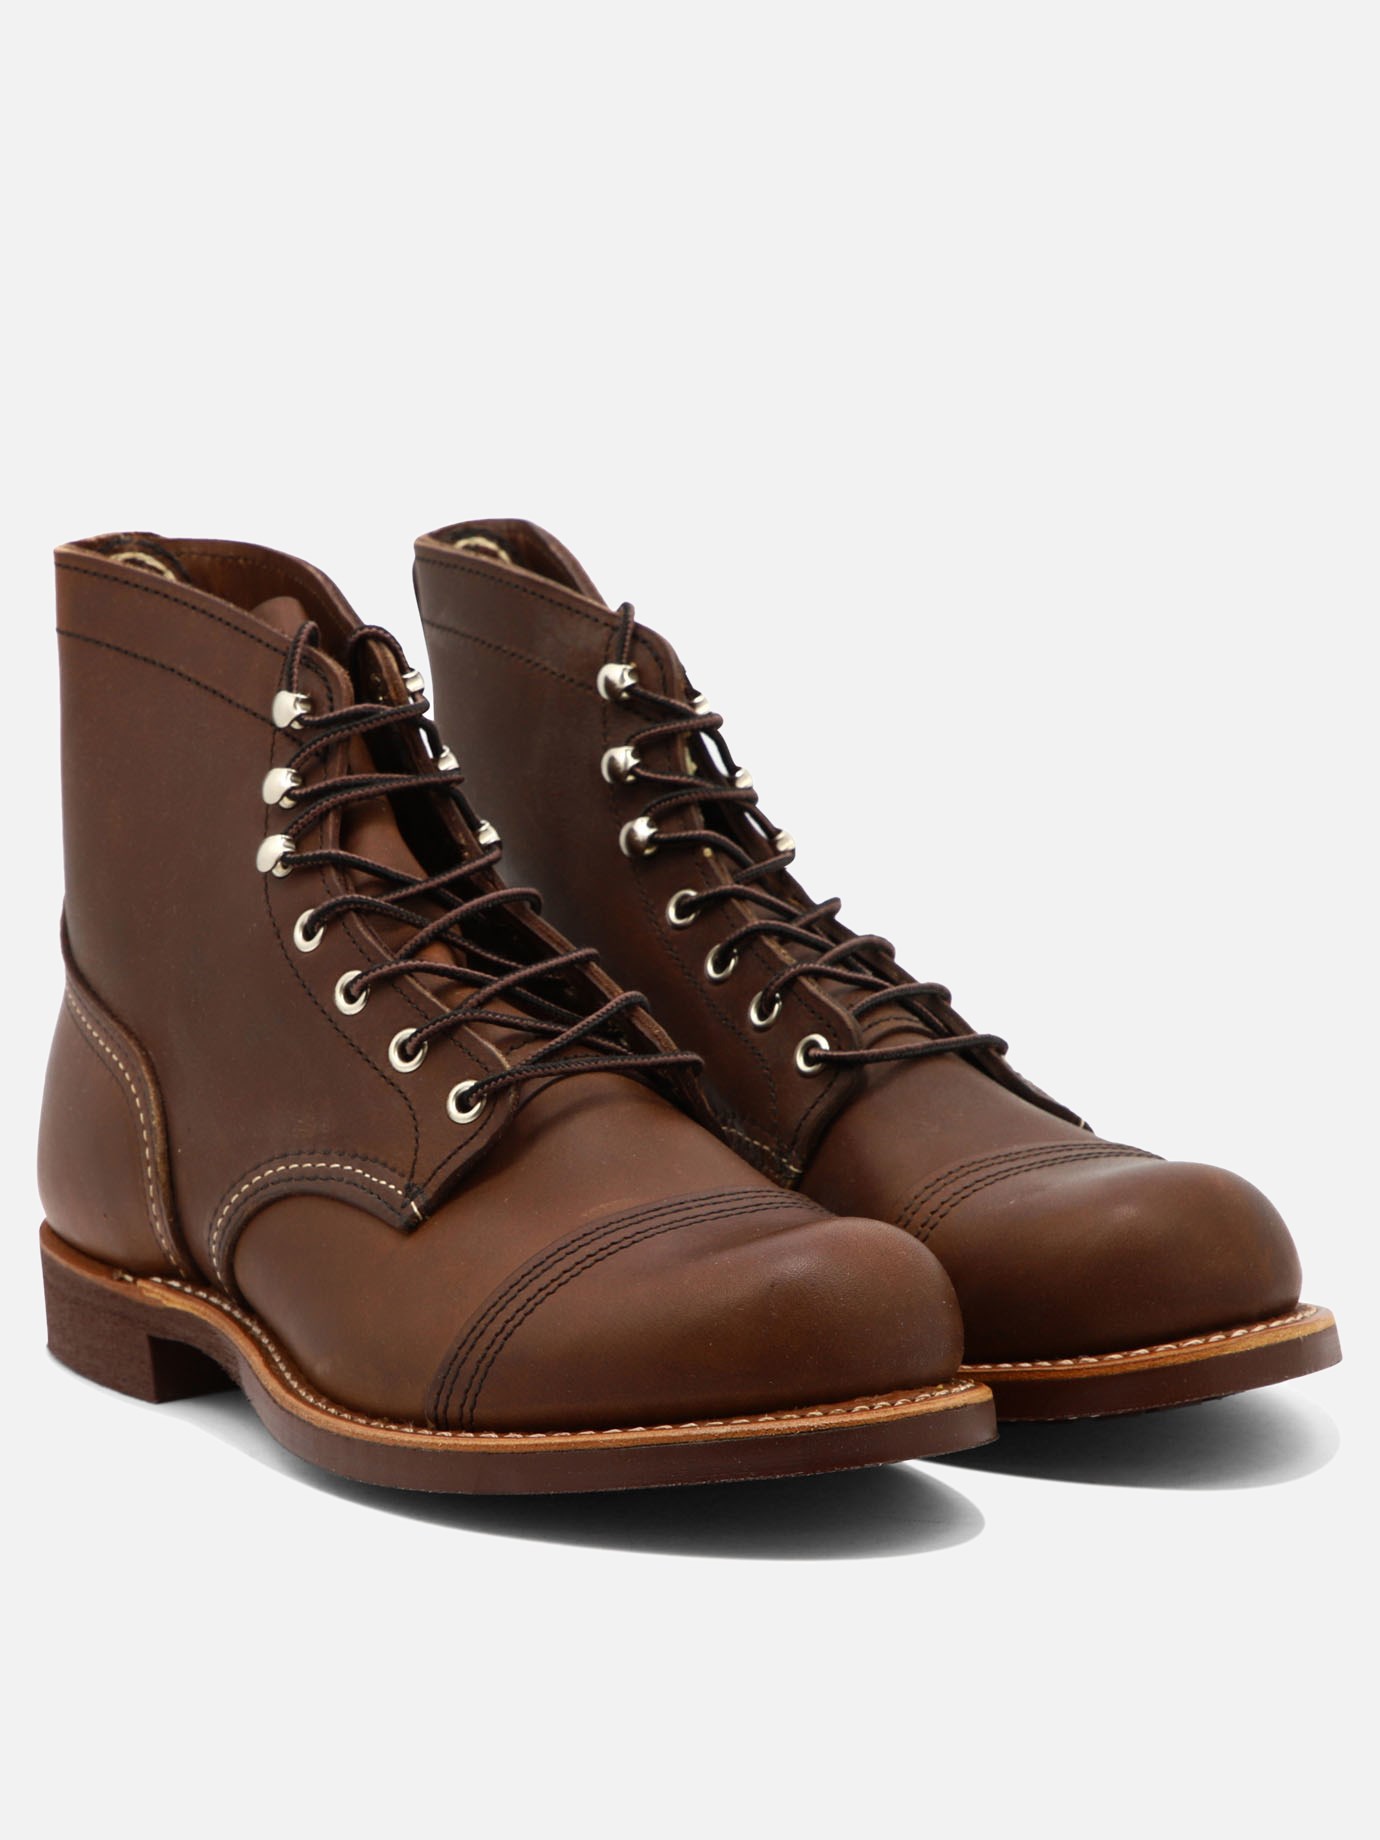 Stivaletti  Iron Ranger  by Red Wing Shoes